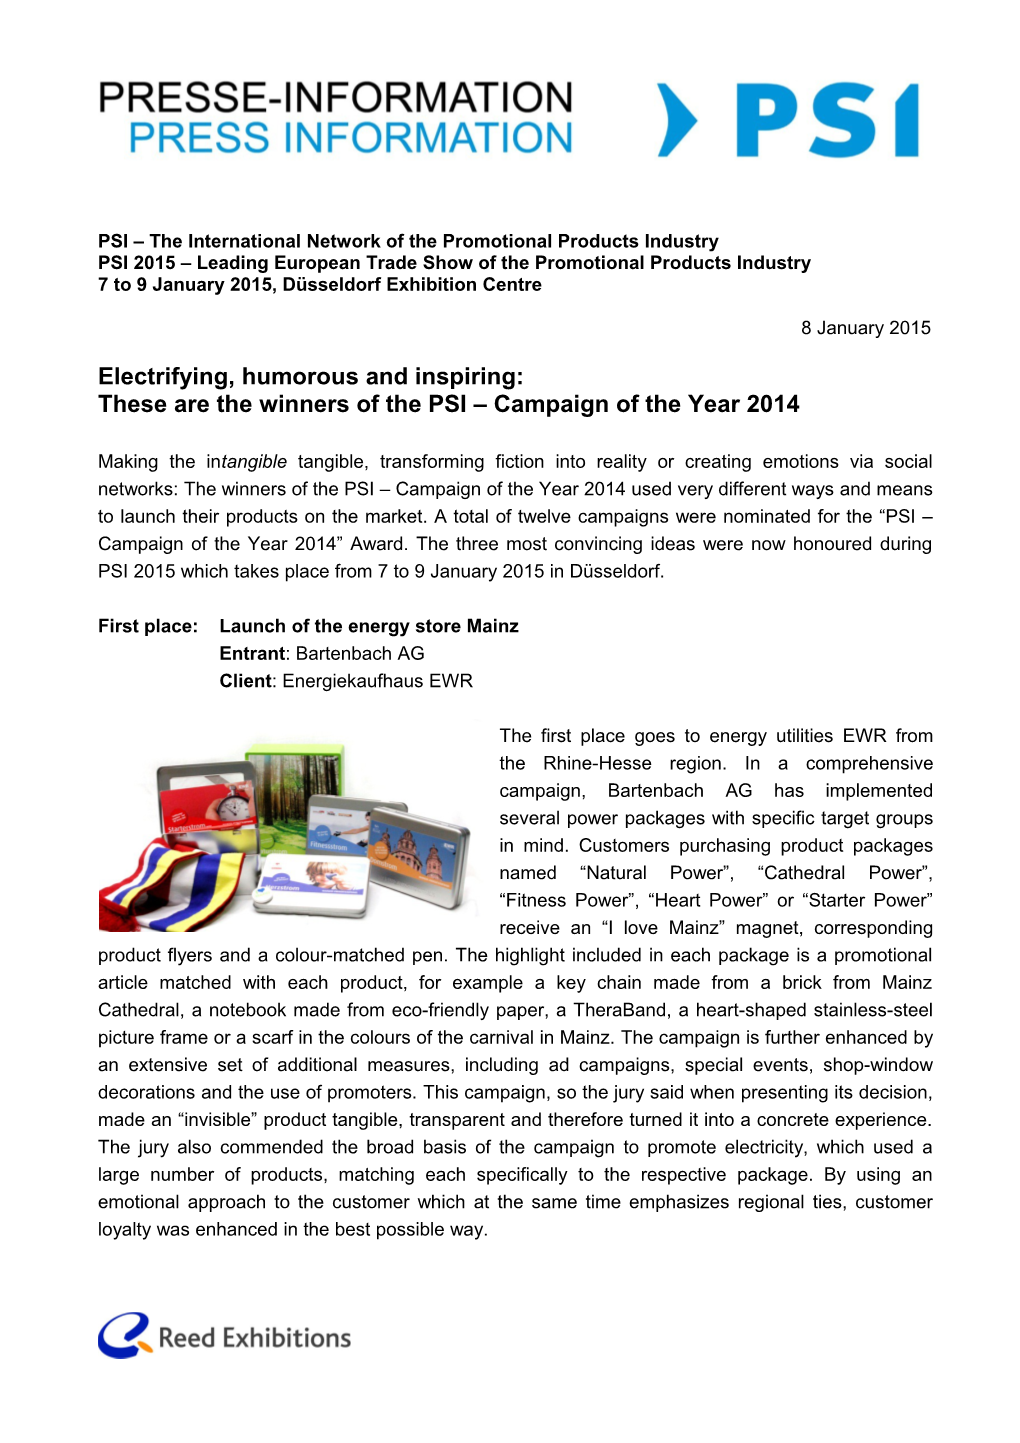 These Are the Winners of the PSI Campaign of the Year 2014